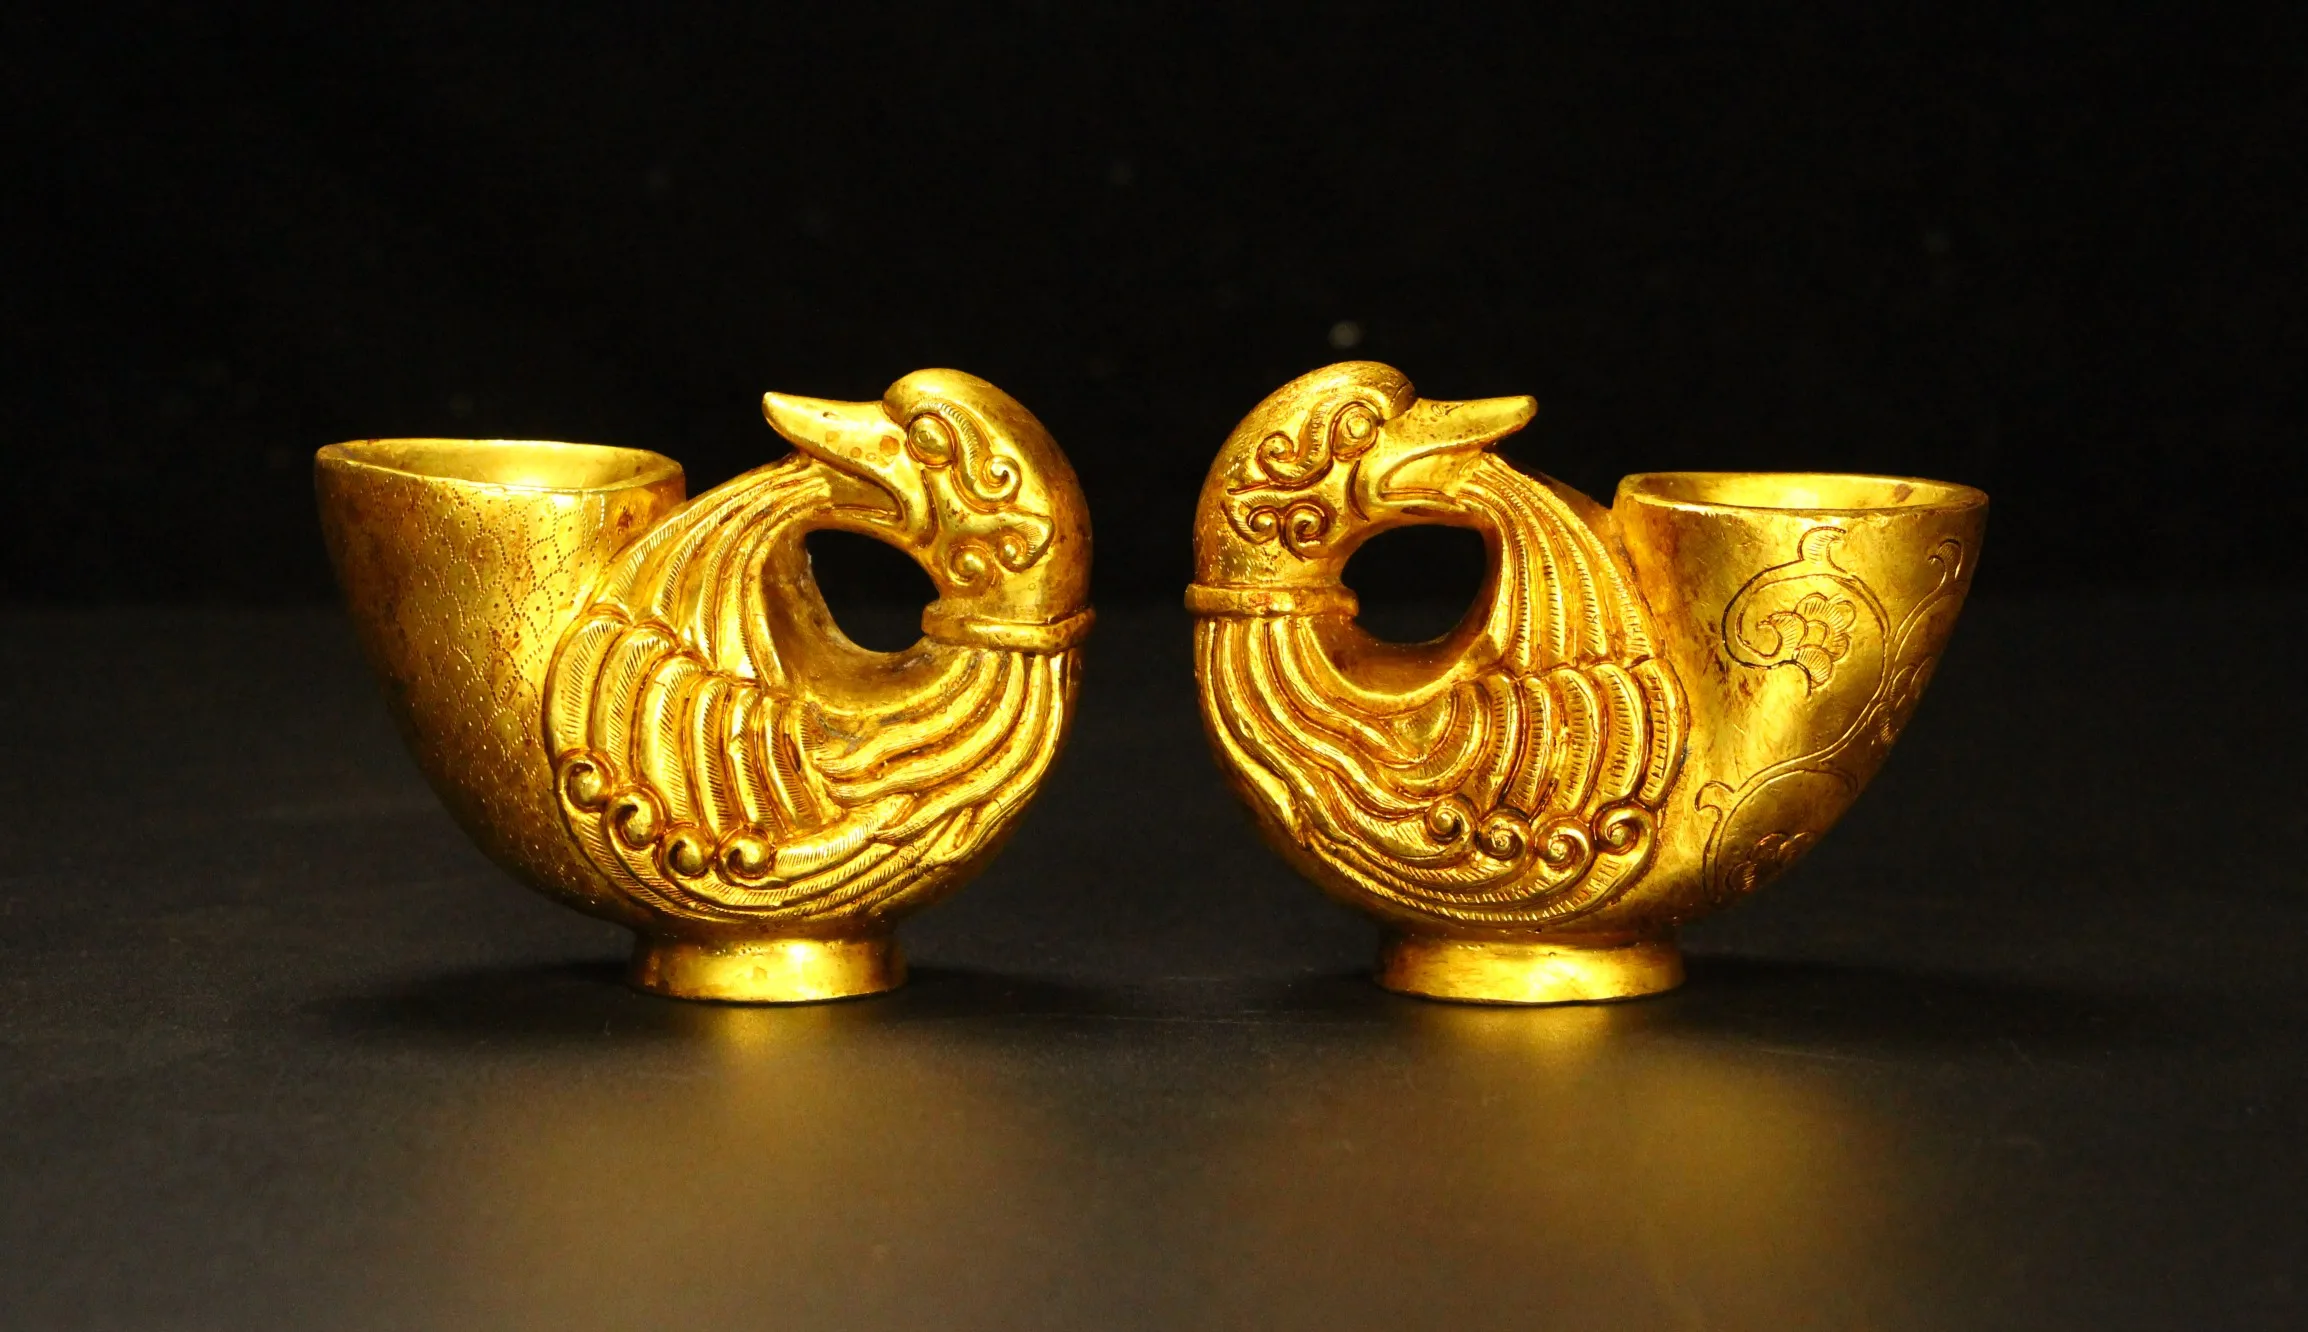 

LAOJUNLU A Pair Of Mandarin Duck Cups Handmade From Copper Gilt Chinese Traditional Style Antiques Fine Art Gifts Crafts